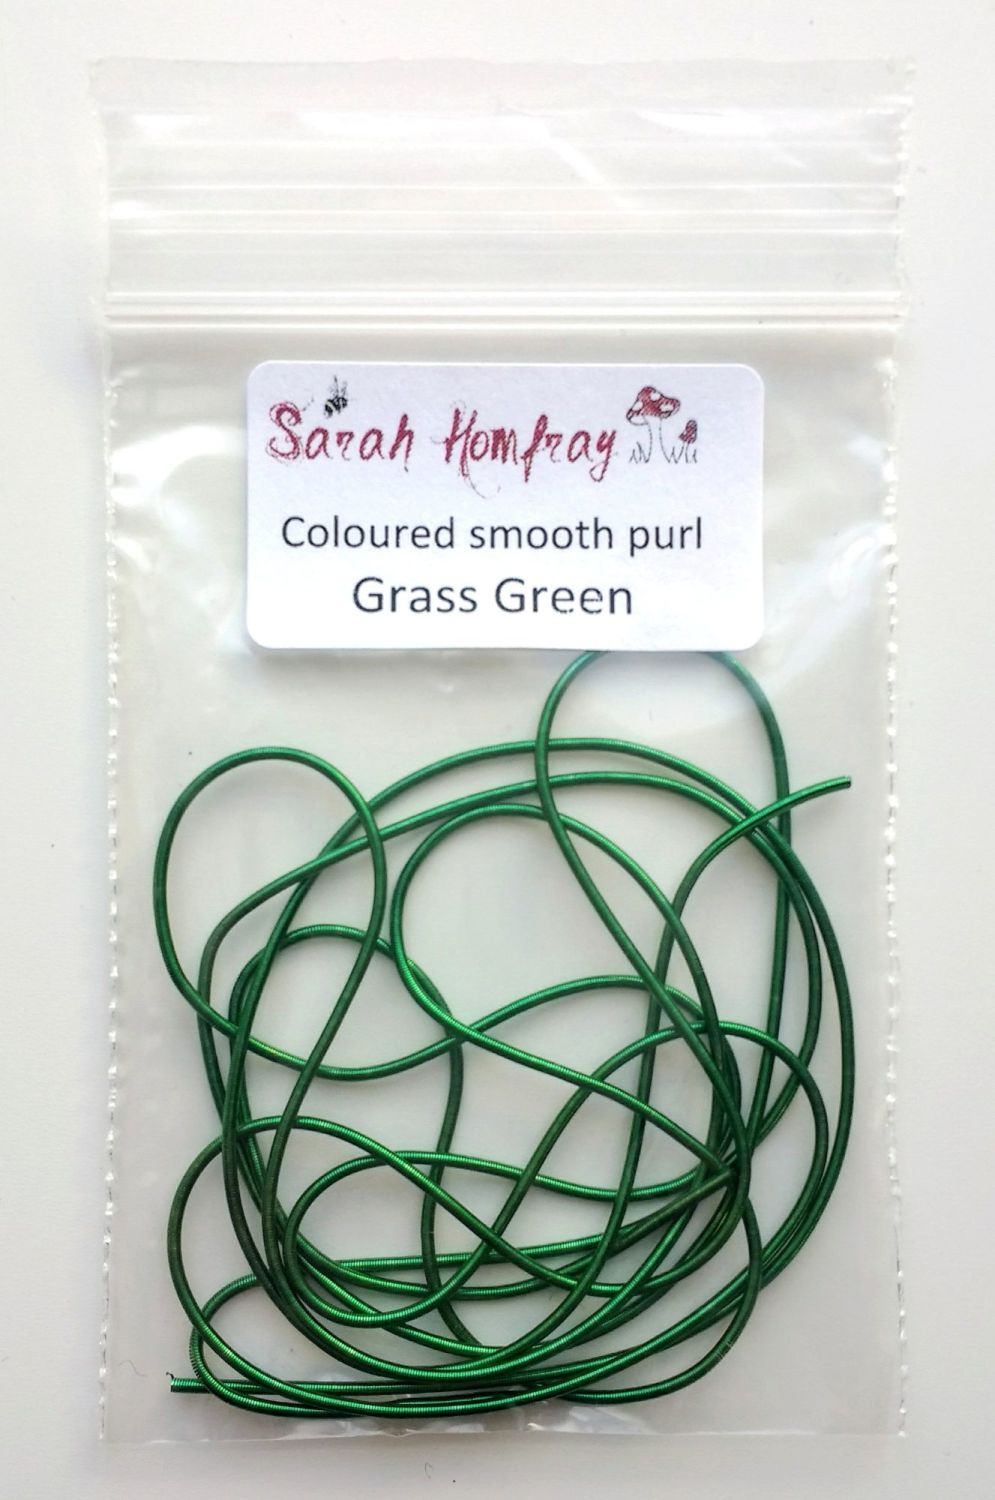 NEW! Coloured smooth purl no.6 - Grass Green